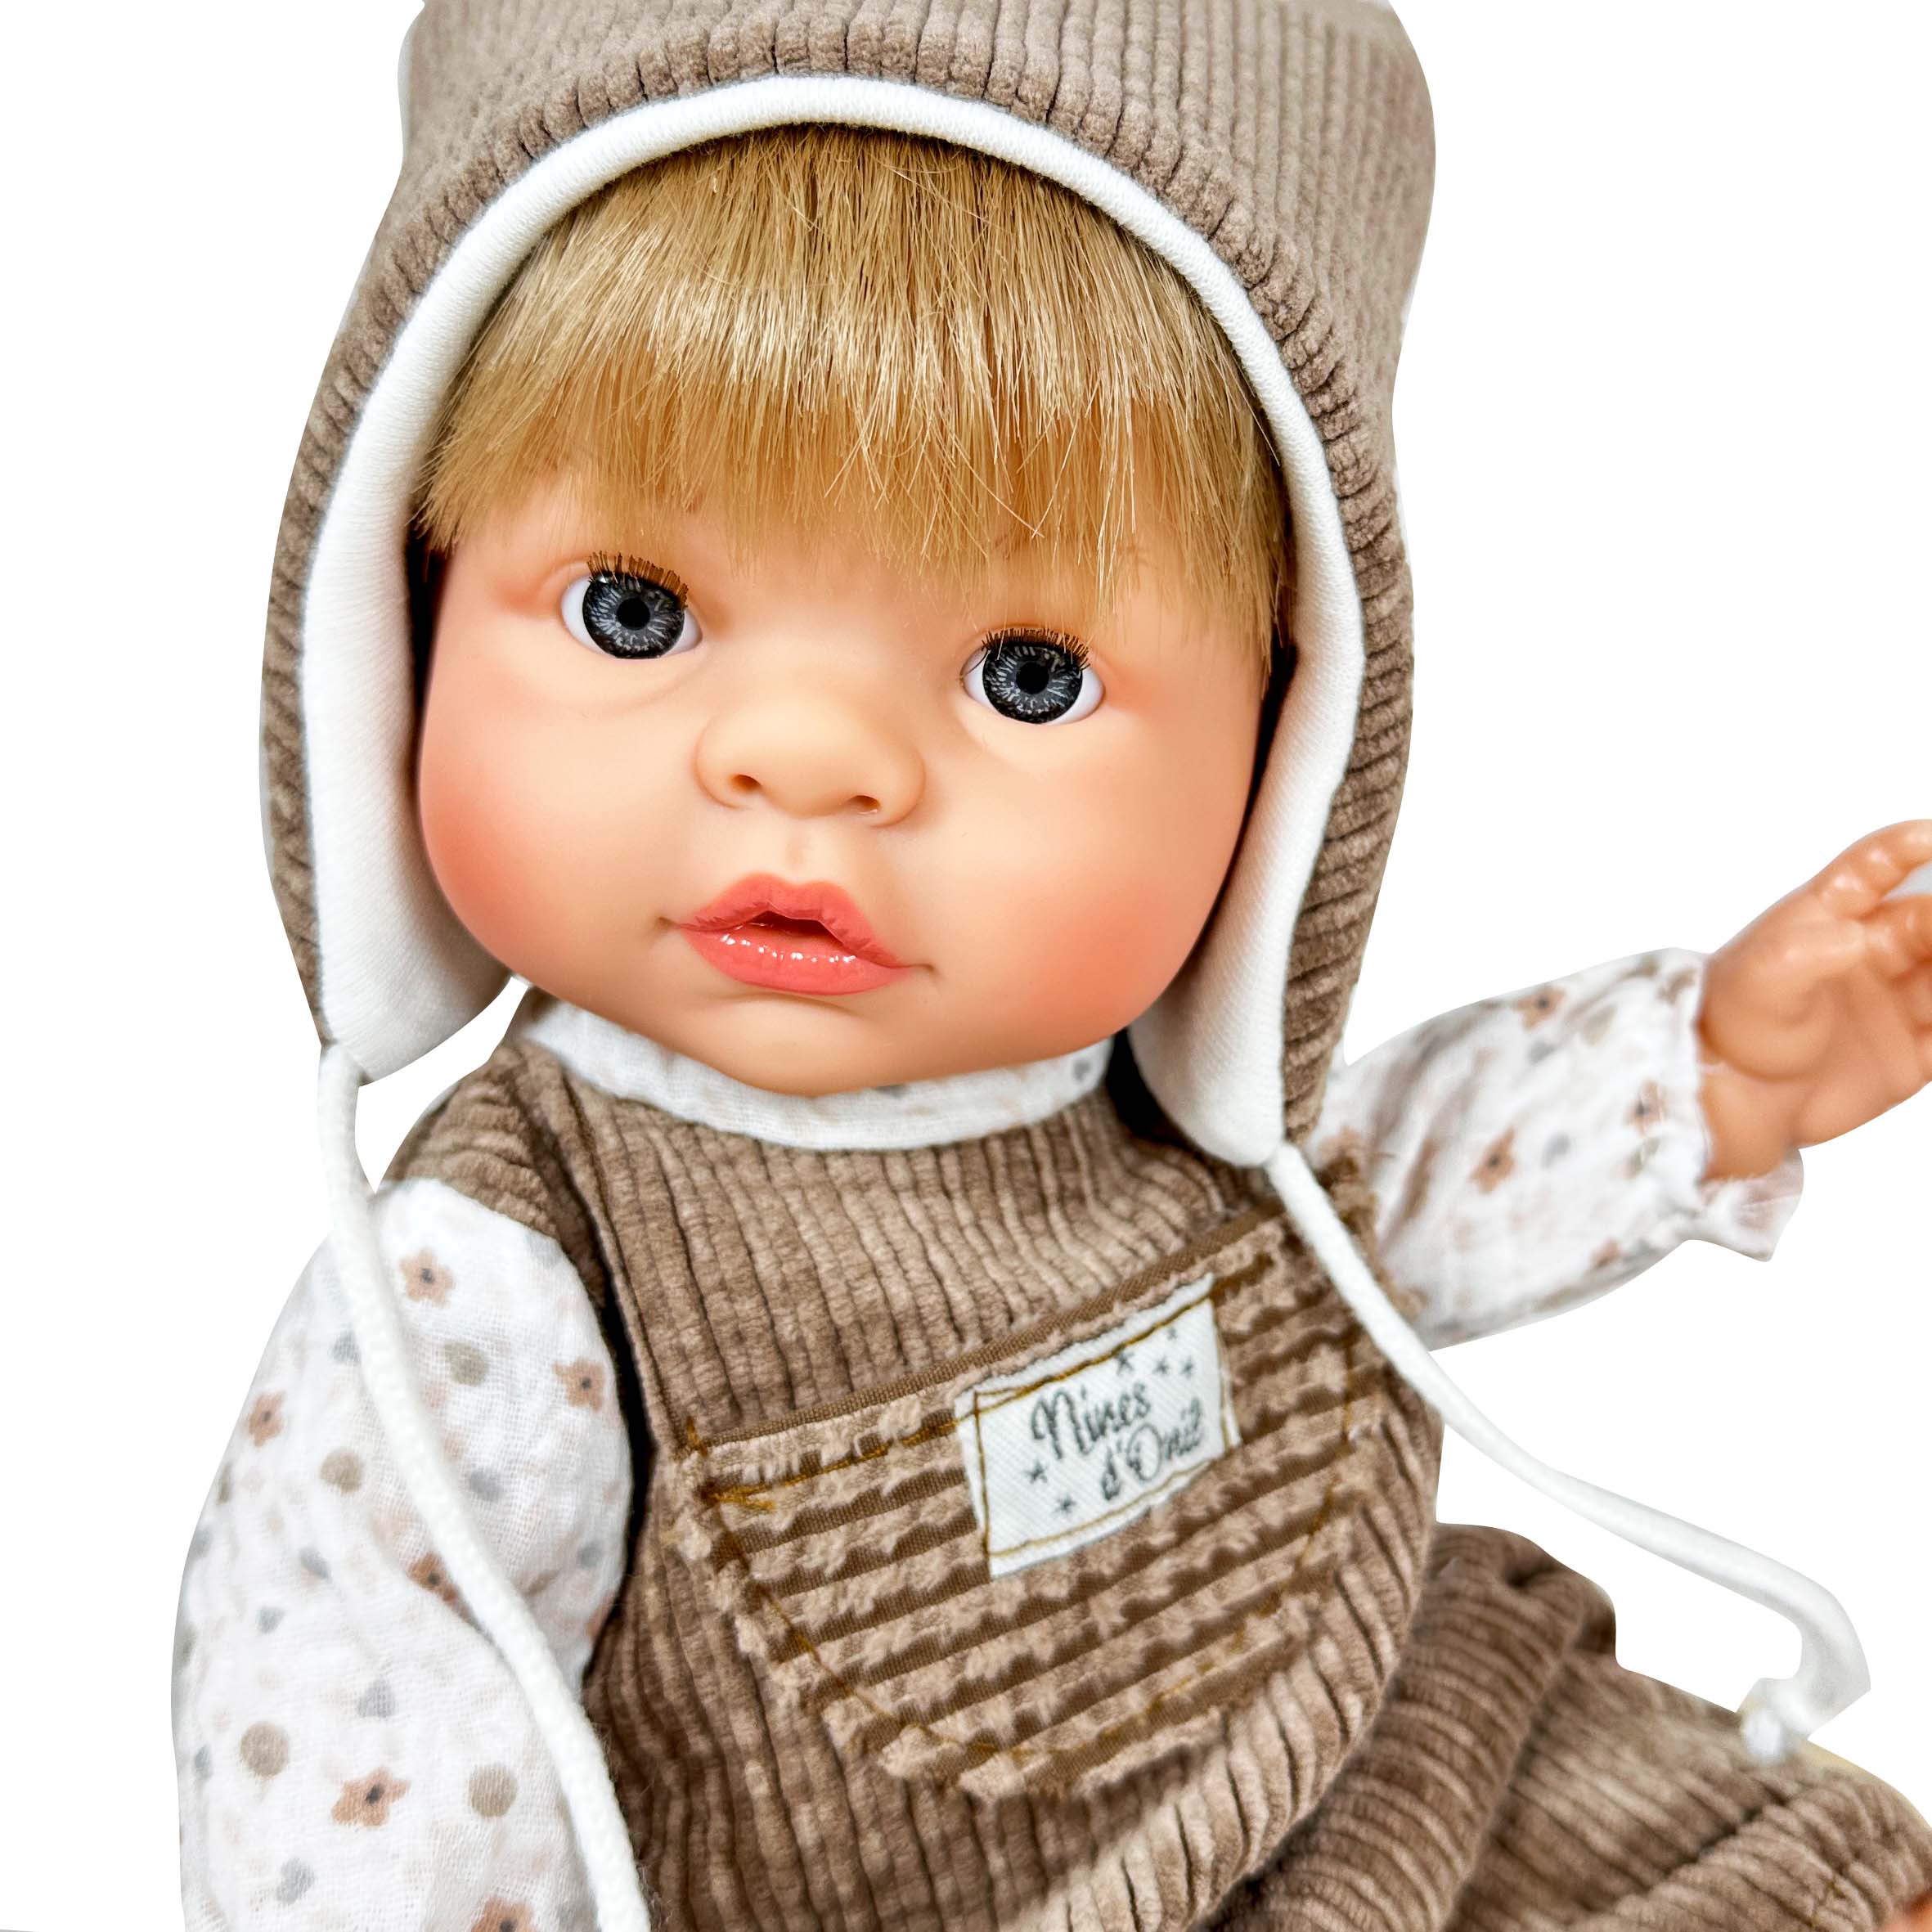 Handmade Collectible Joy Collection Baby Doll (3040) by Nines D&